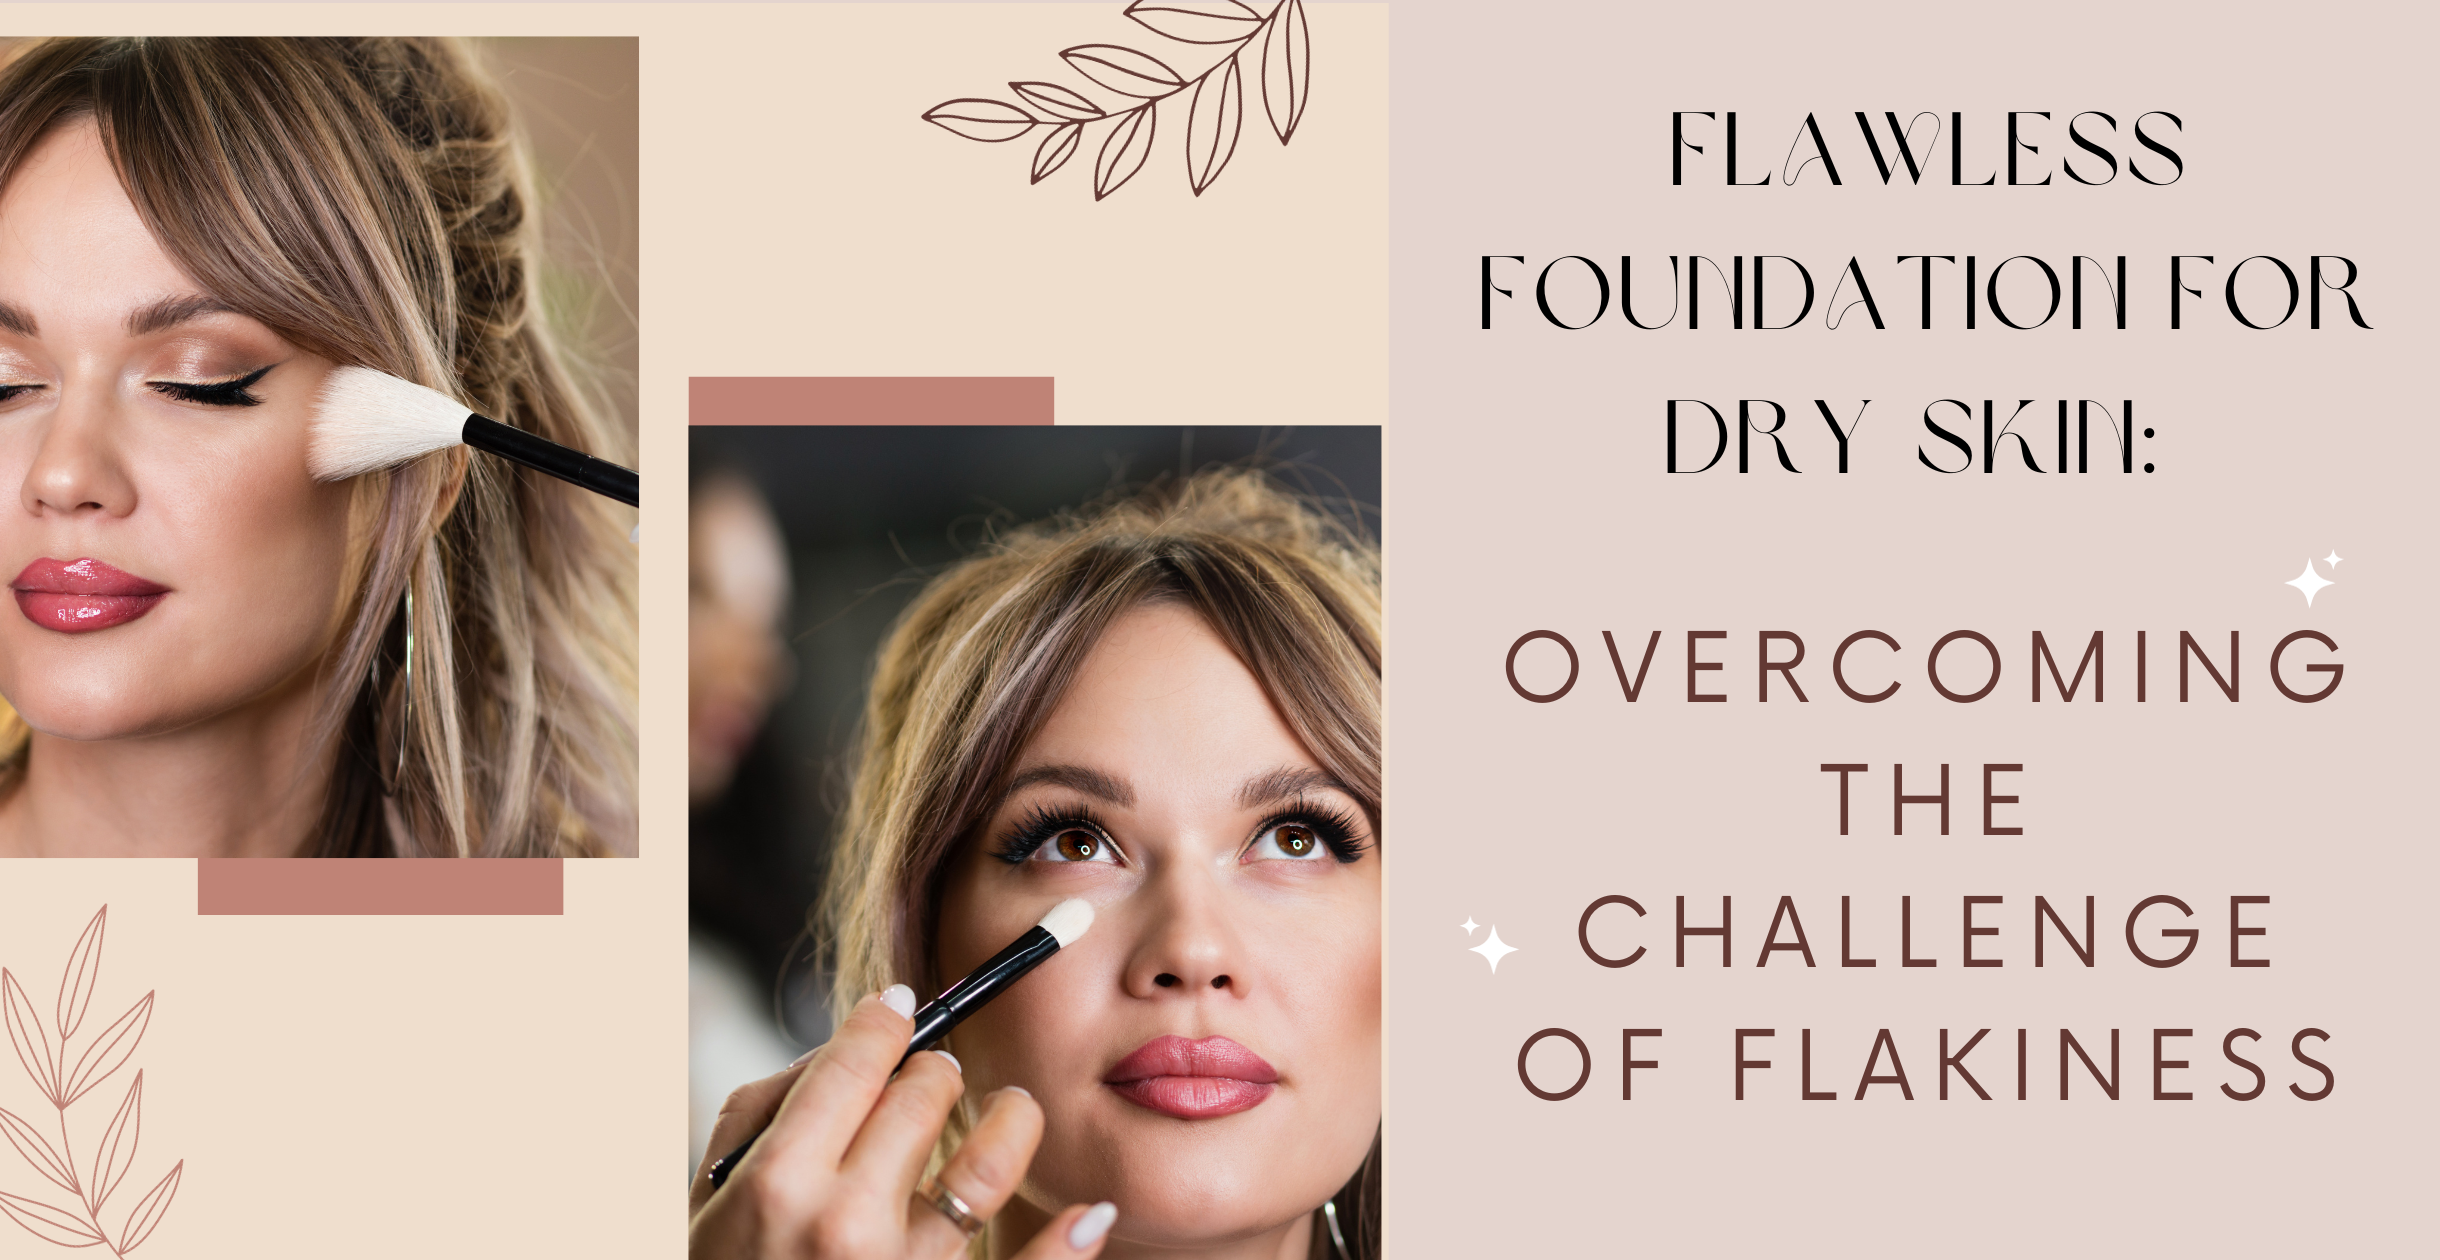 Flawless Foundation for Dry Skin: Overcoming the Challenge of Flakiness